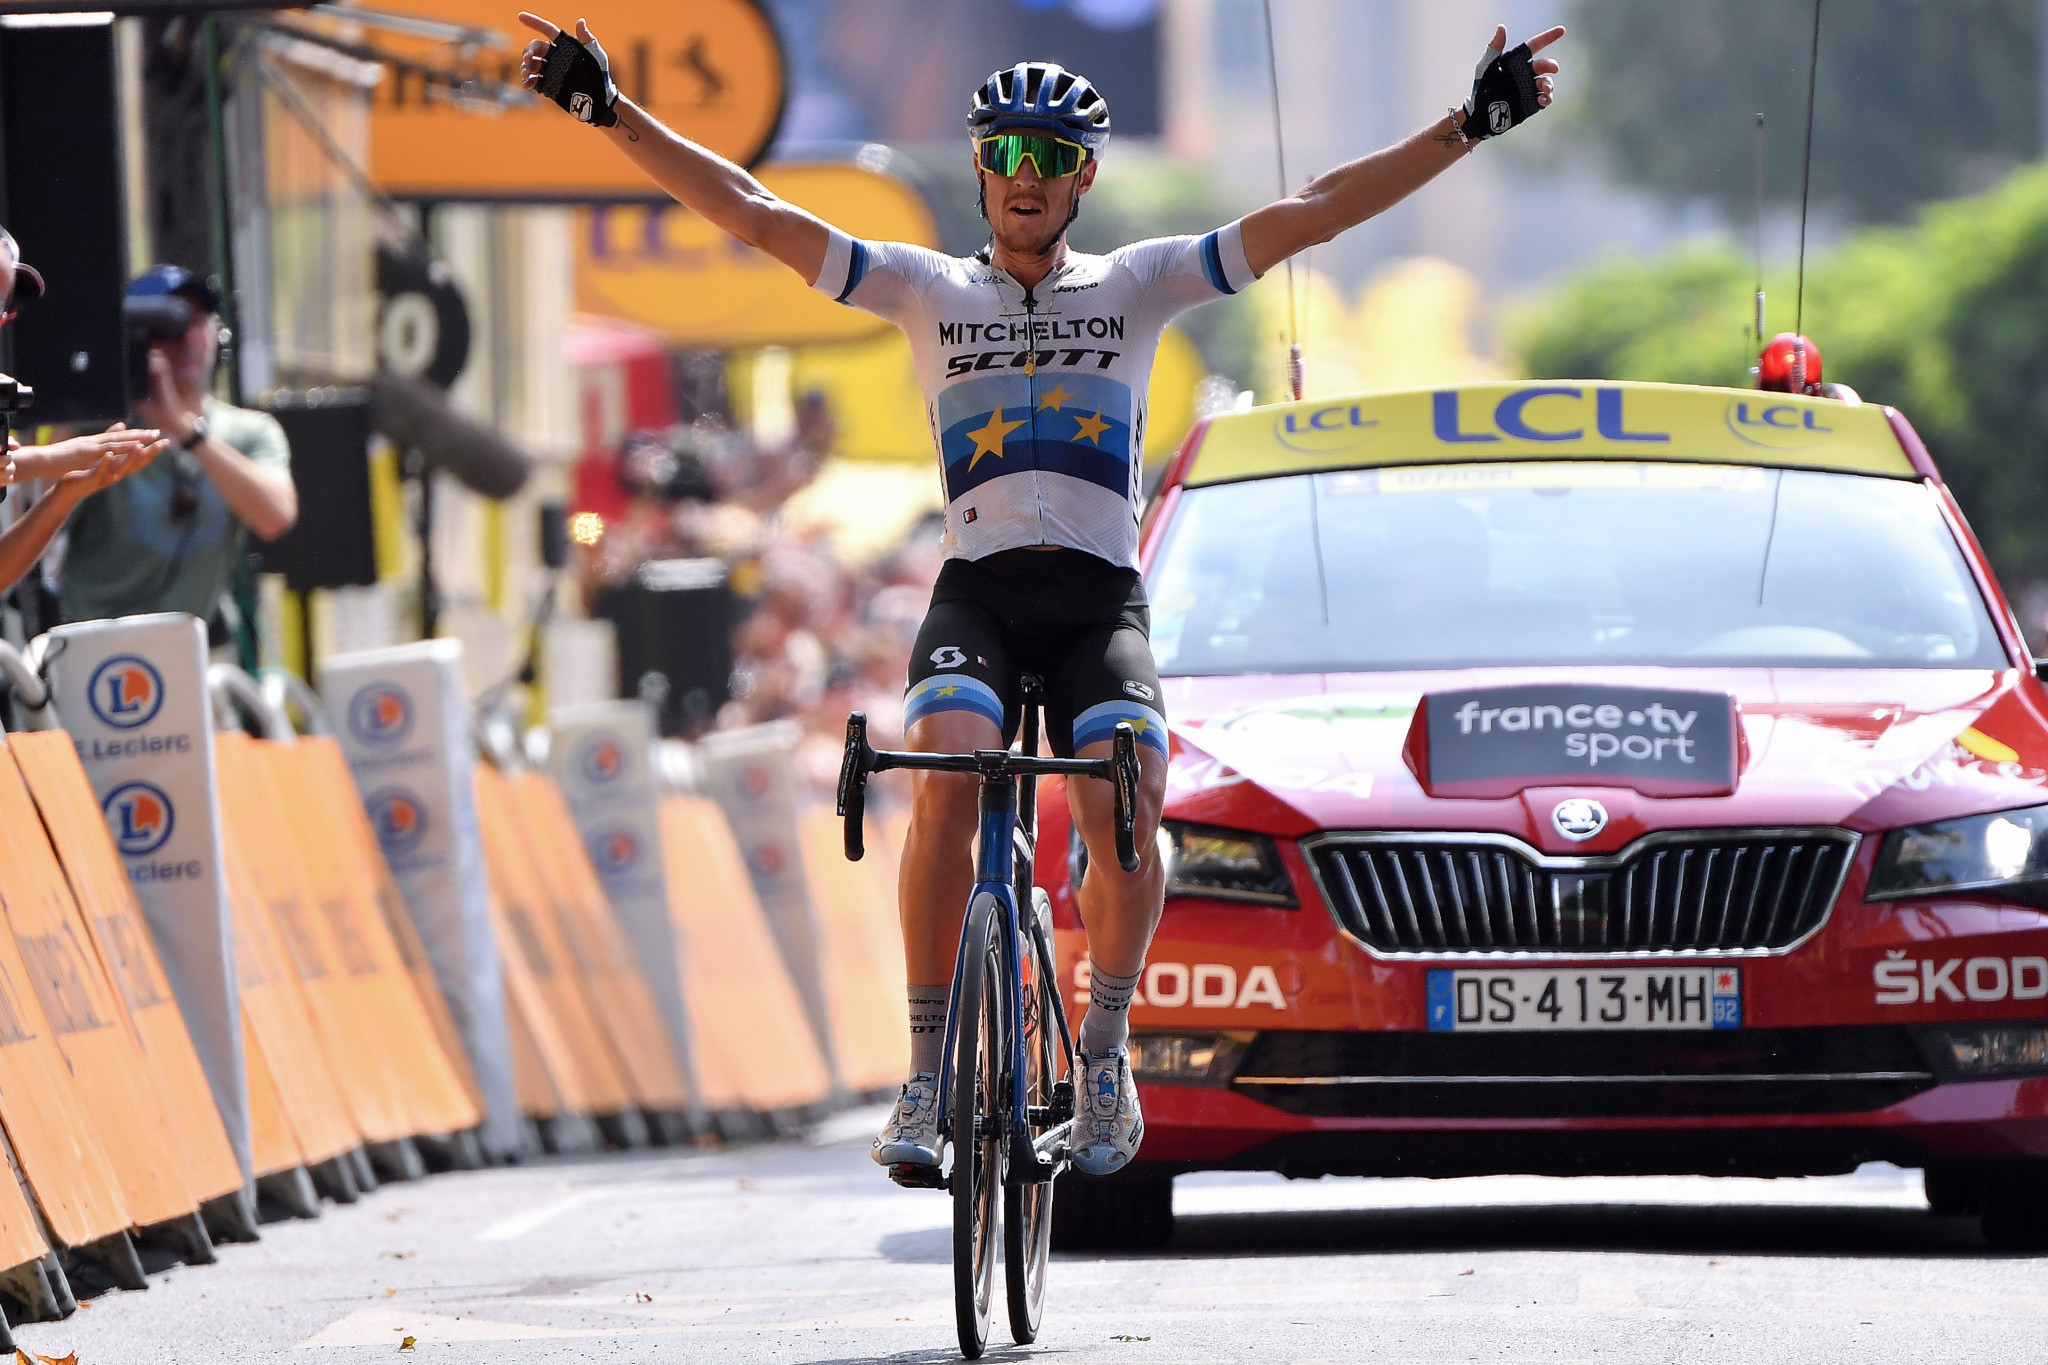 Italy’s Matteo Trentin escaped from a breakaway group to win stage 17 of the Tour de France ©Getty Images